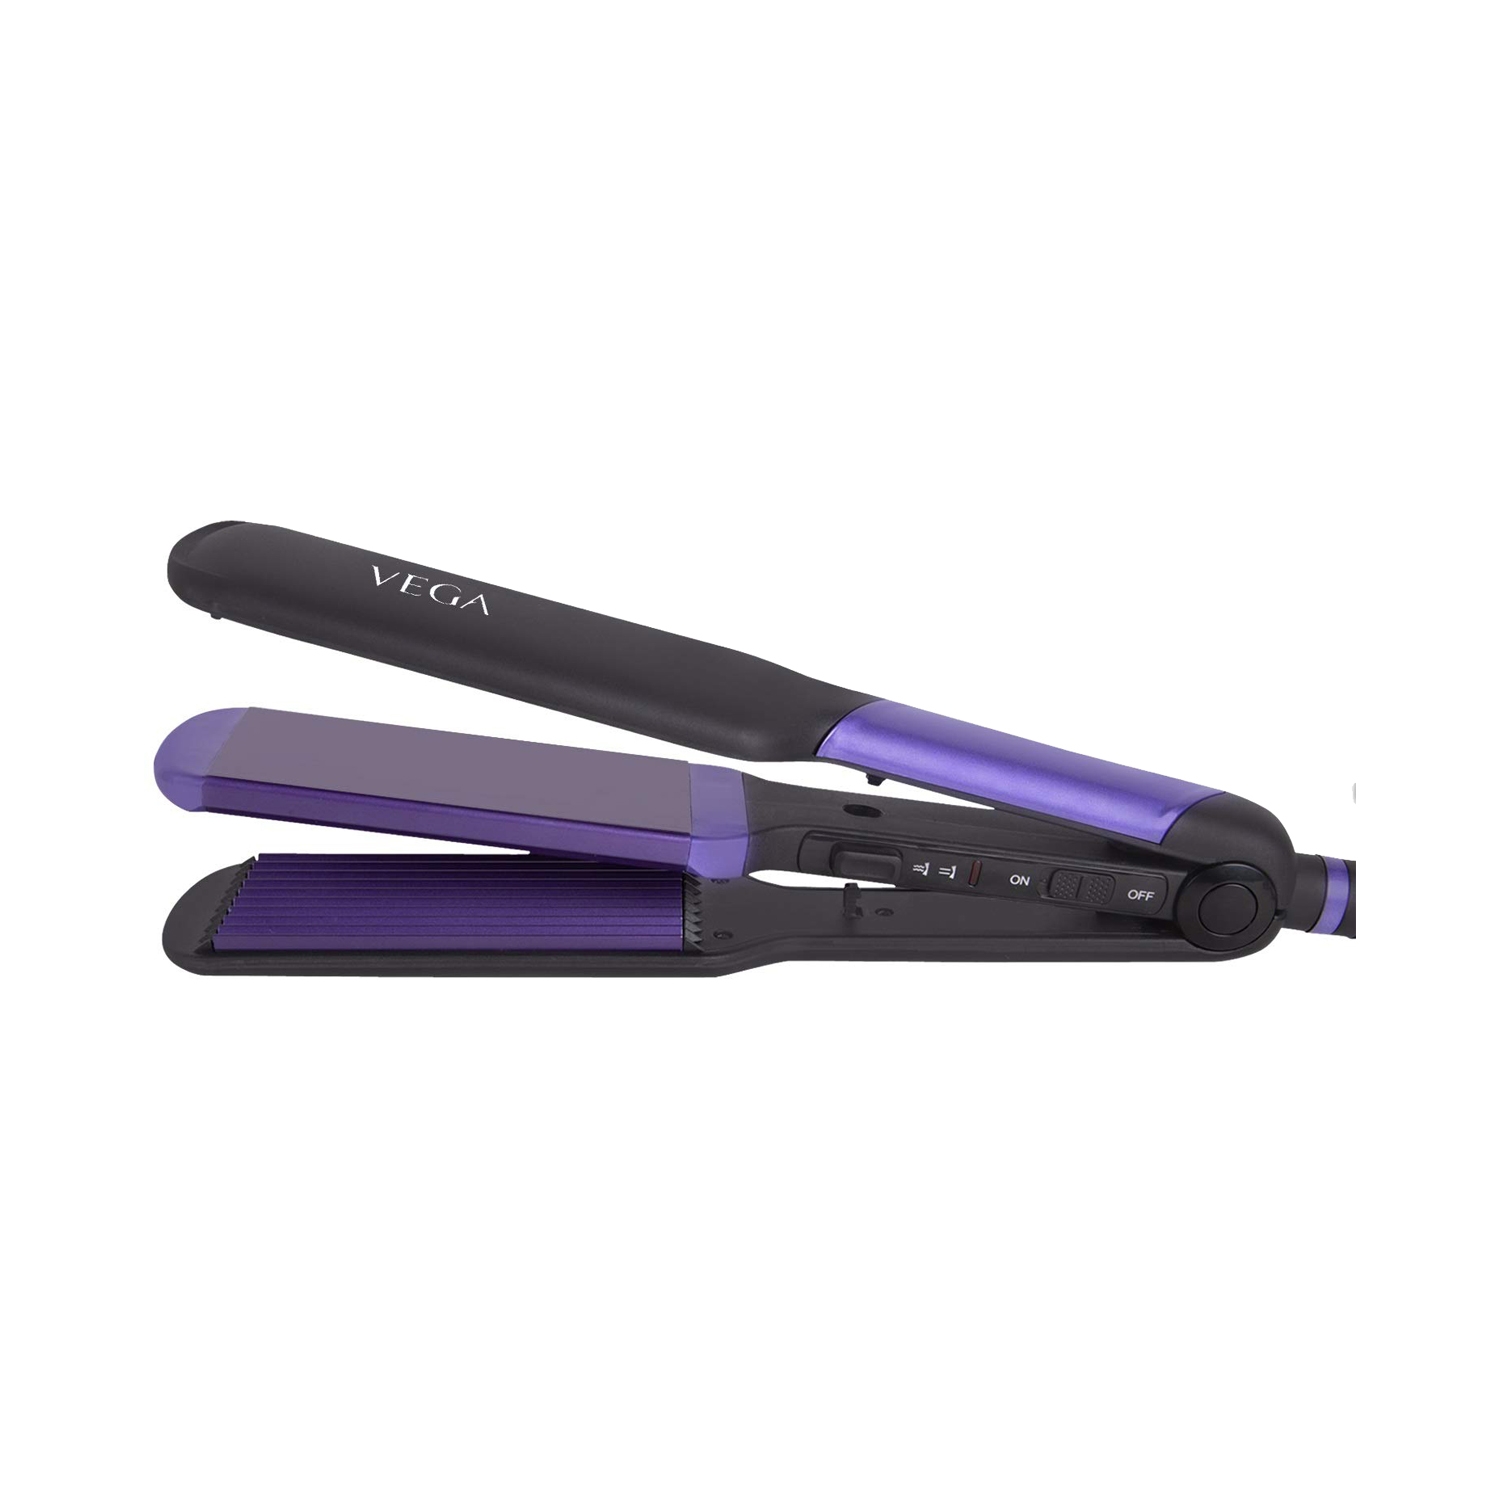 PHILIPS BHS73800 Kerashine Titanium Wide Plate Straightener With  SilkProtect Technology Teal  Philips HP810060 Hair Dryer Blue   Amazonin Beauty